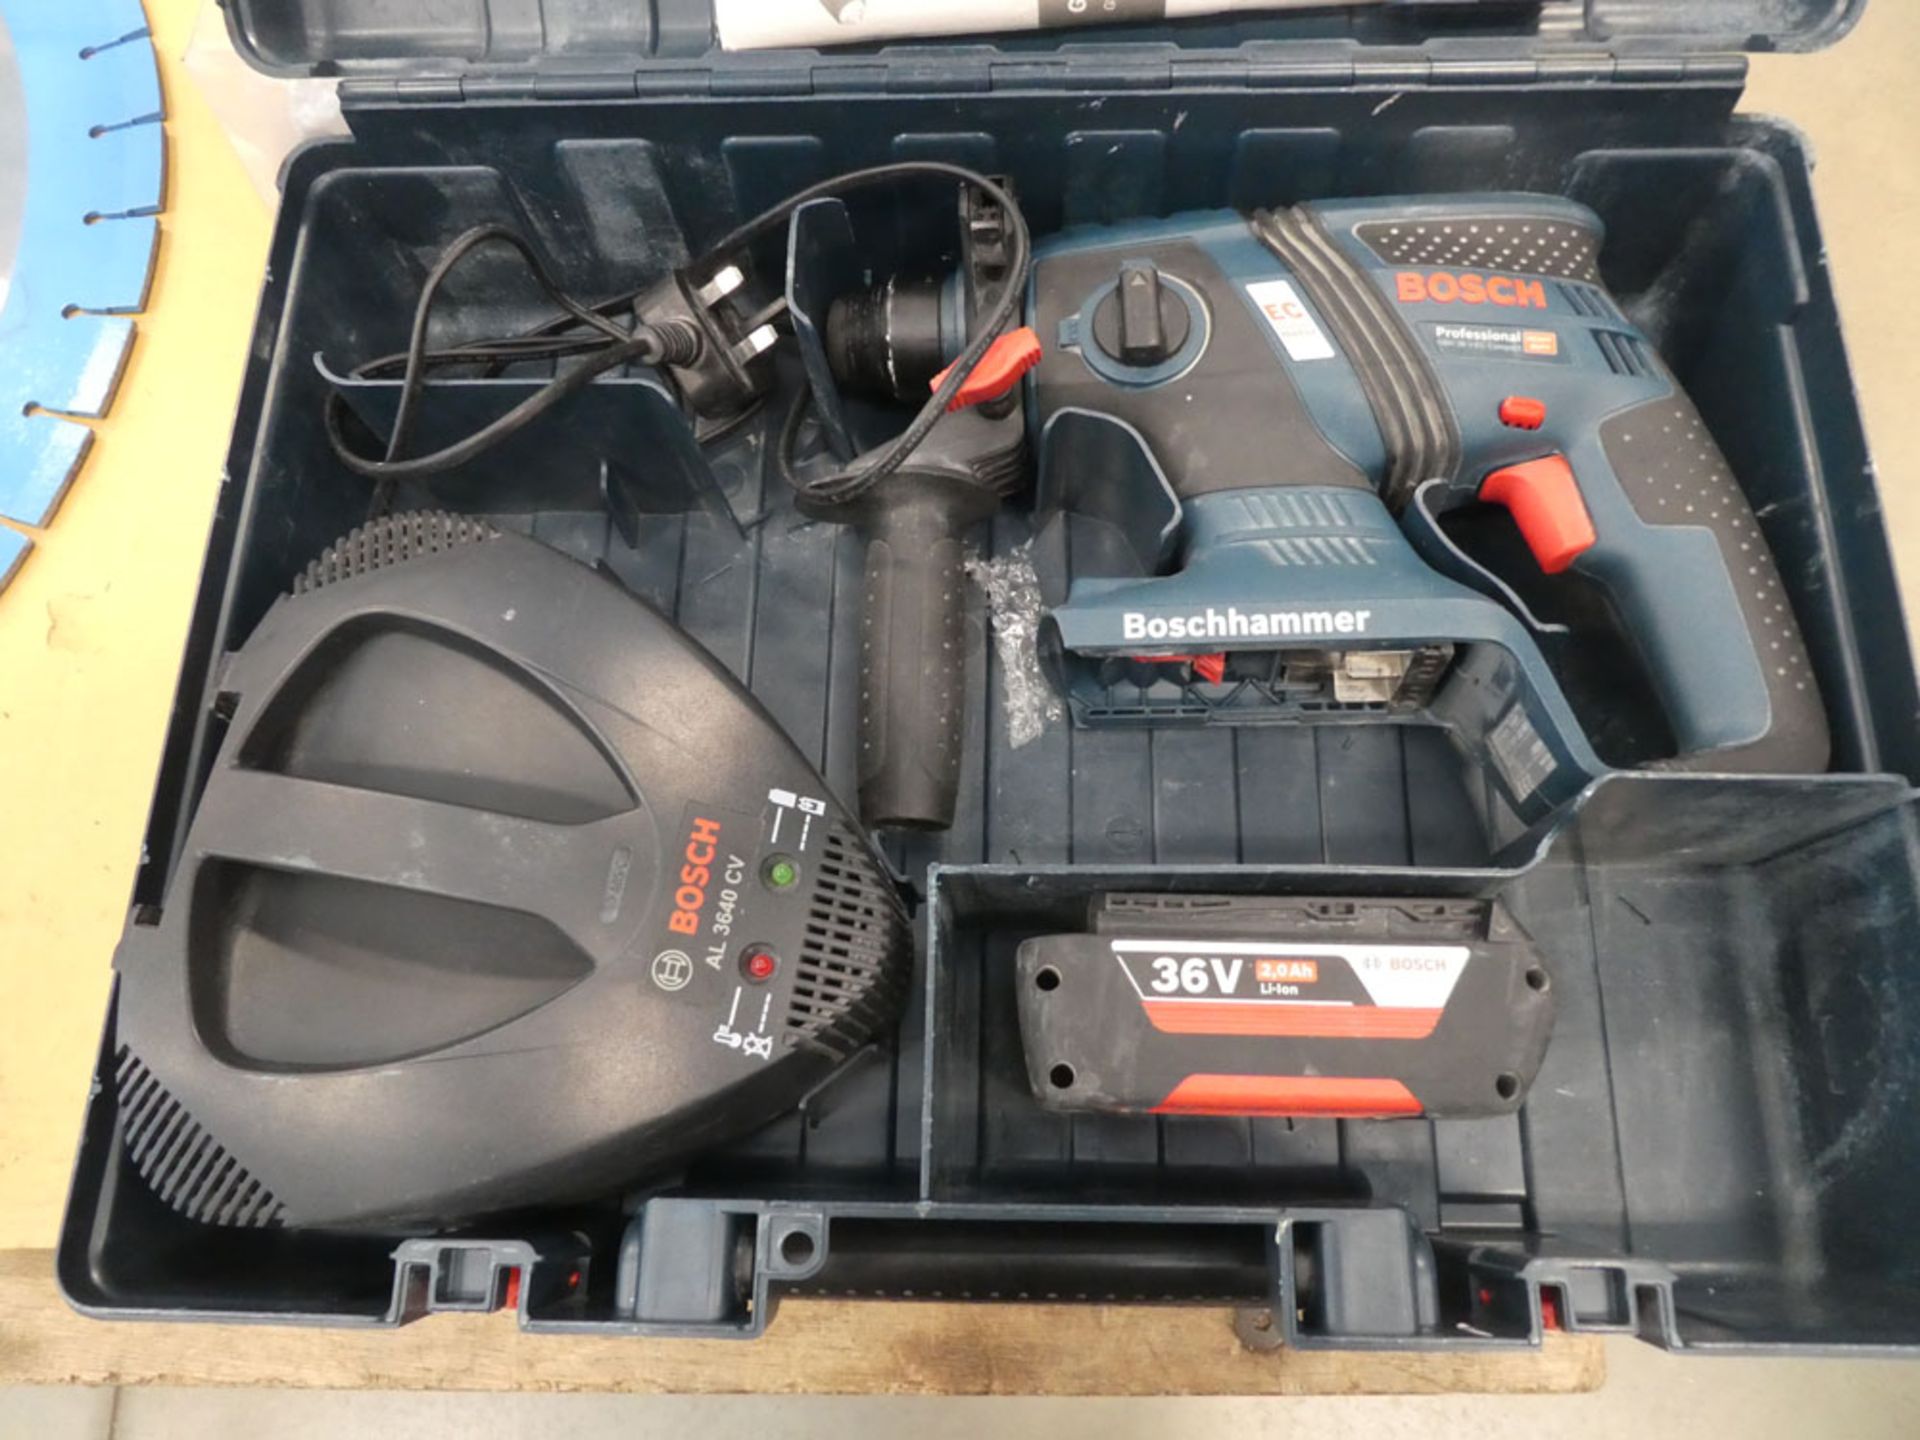 Bosch 36V SDS drill with one battery and charger